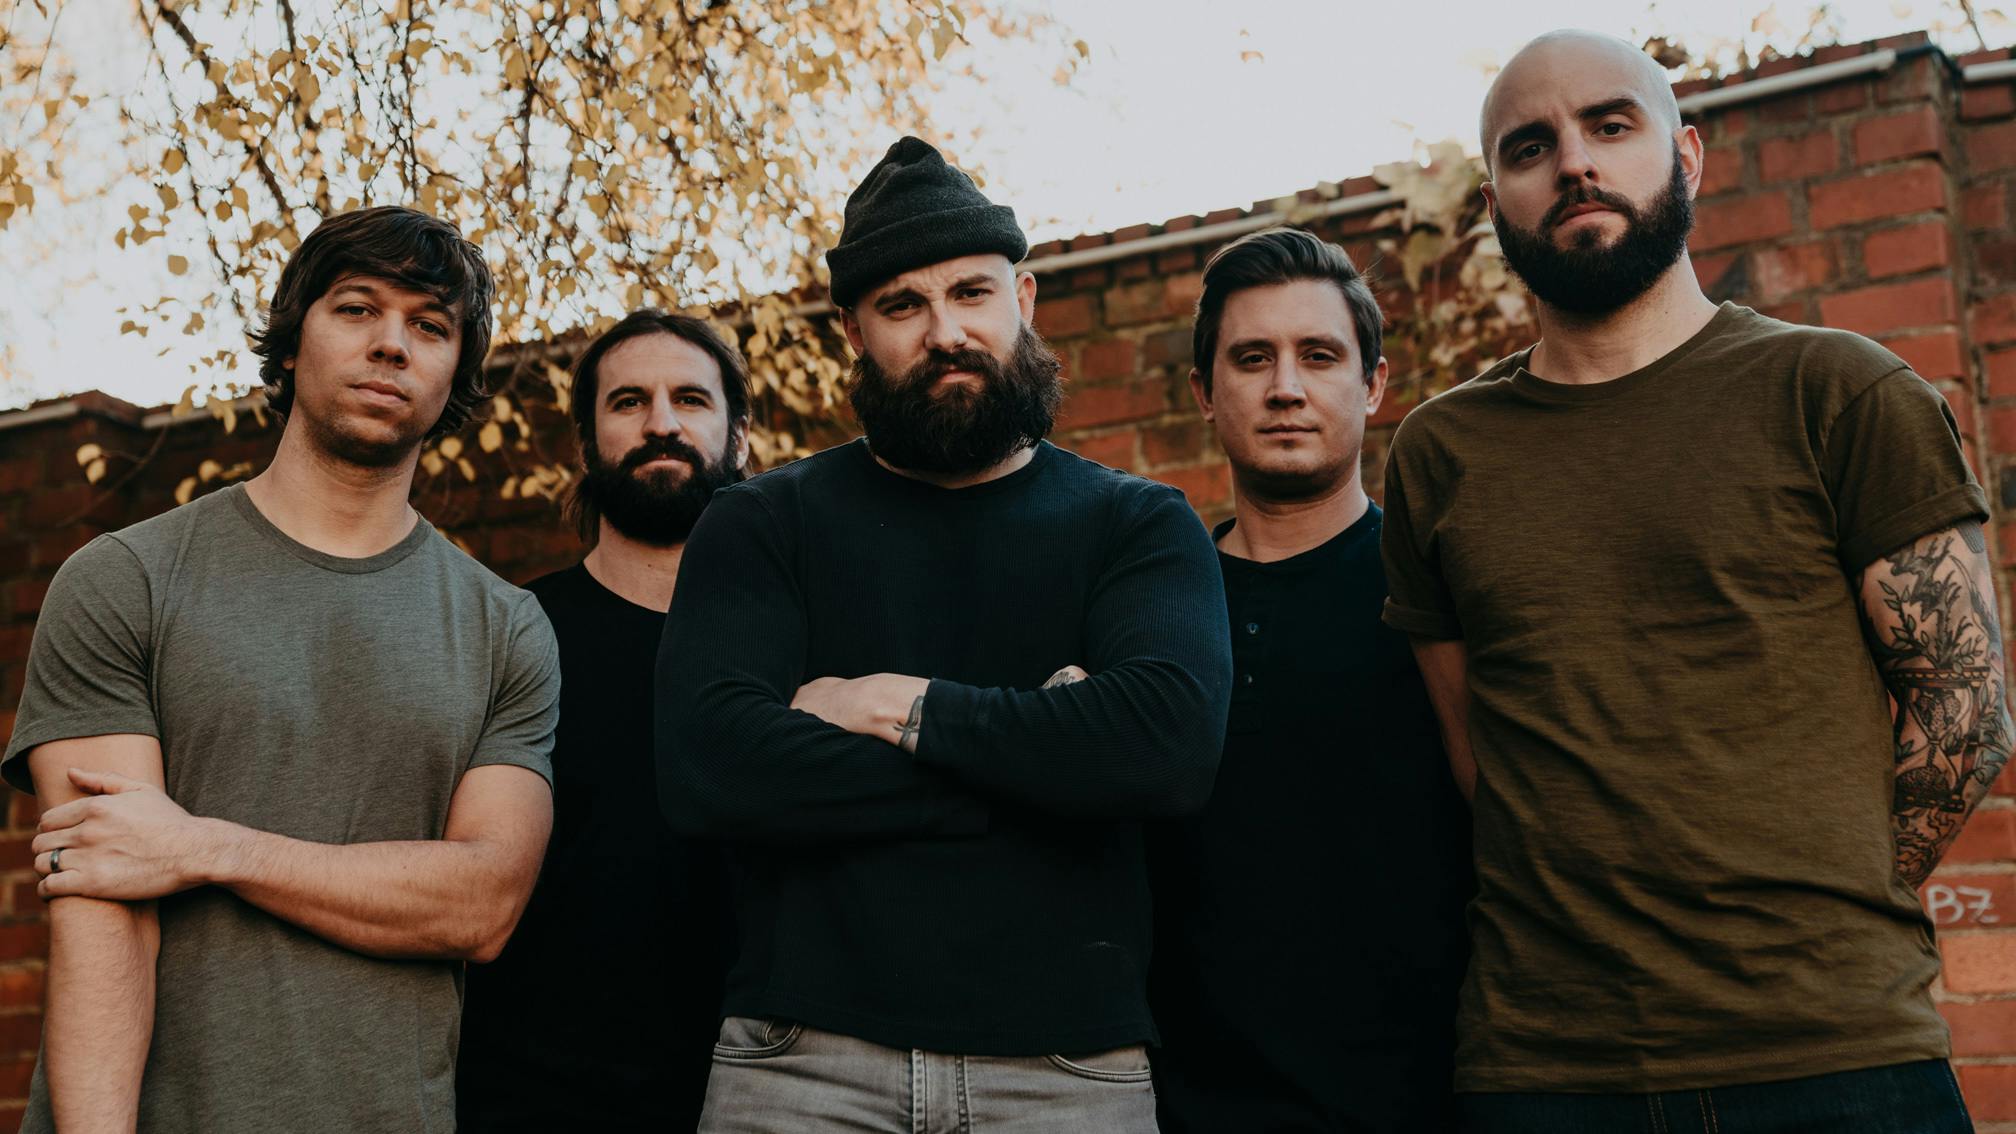 An August Burns Red song was used to 'torture' prisoners in an episode of NCIS: Los Angeles